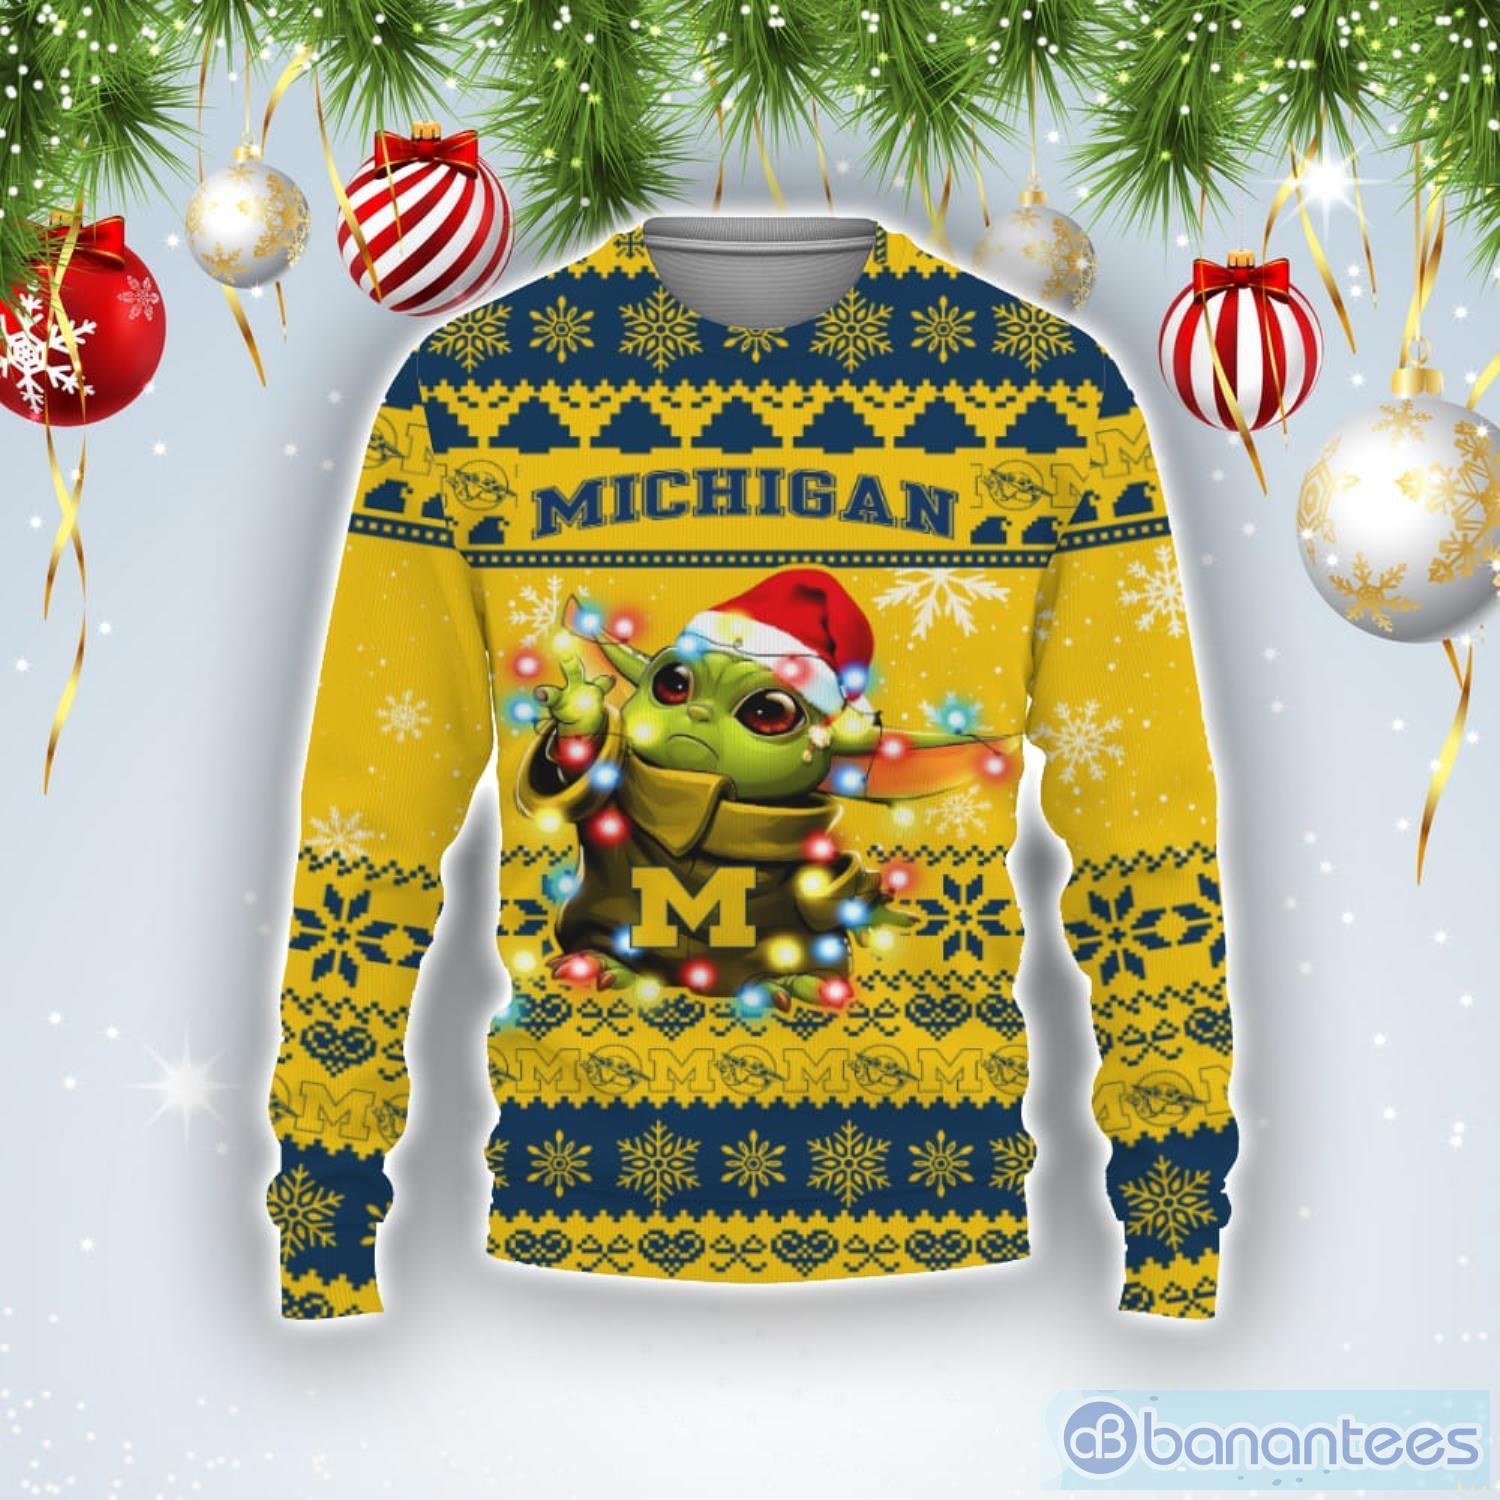 Michigan Wolverines Baby Yoda Star Wars Sports Football American Ugly Christmas Sweater Product Photo 1